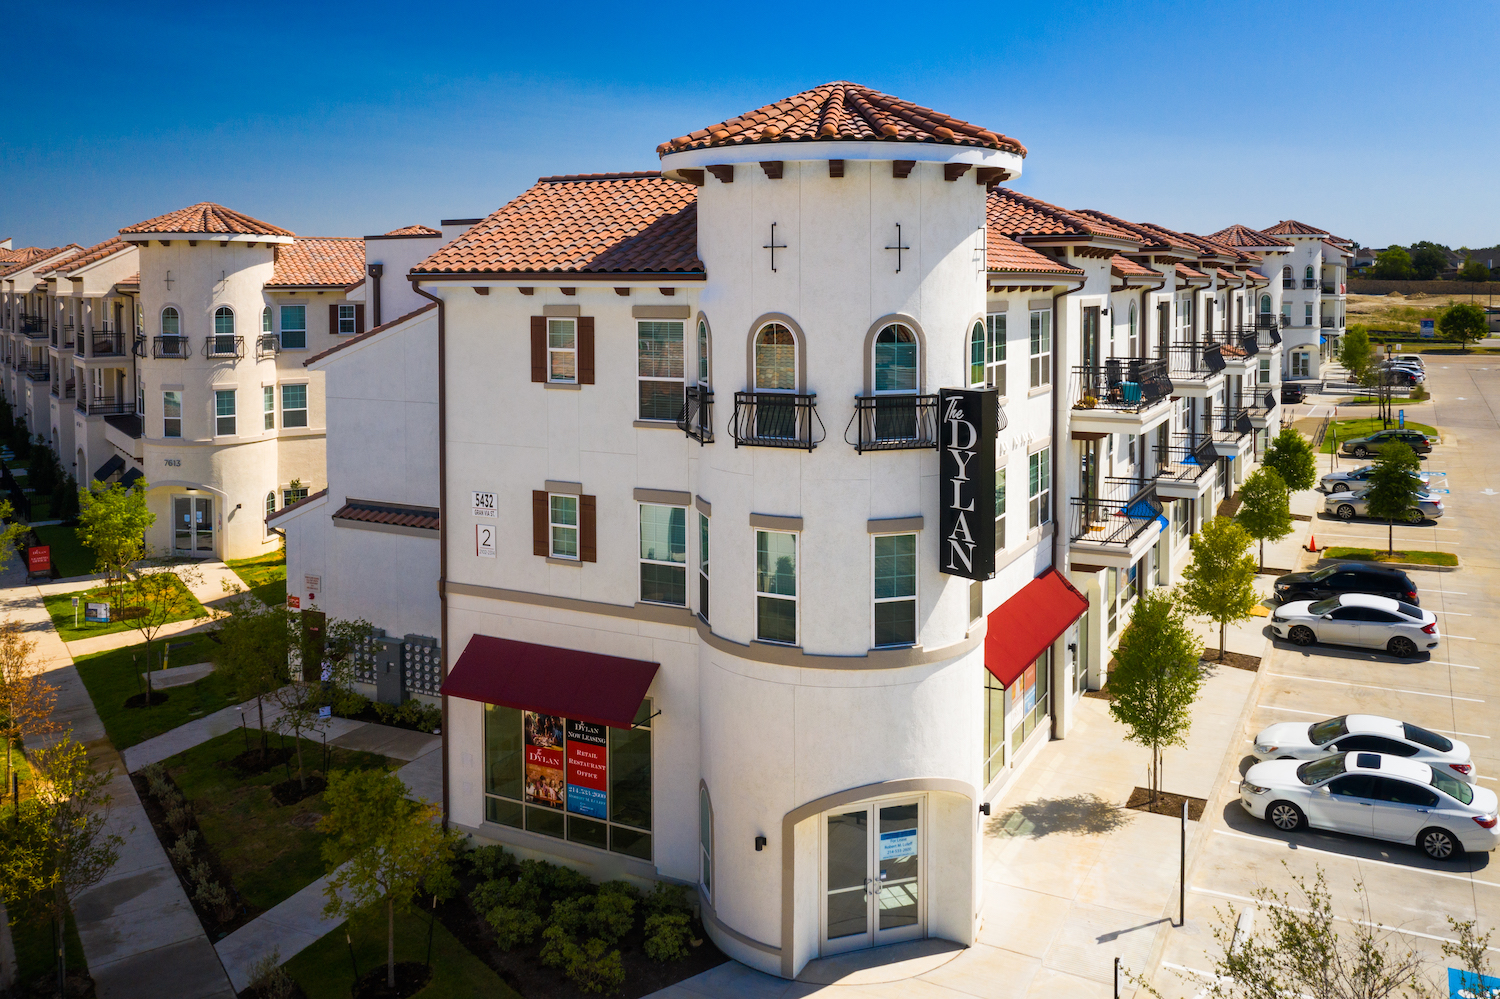 Starboard Fully Subscribes DST Offerings of Two Fort Worth Multifamily Properties